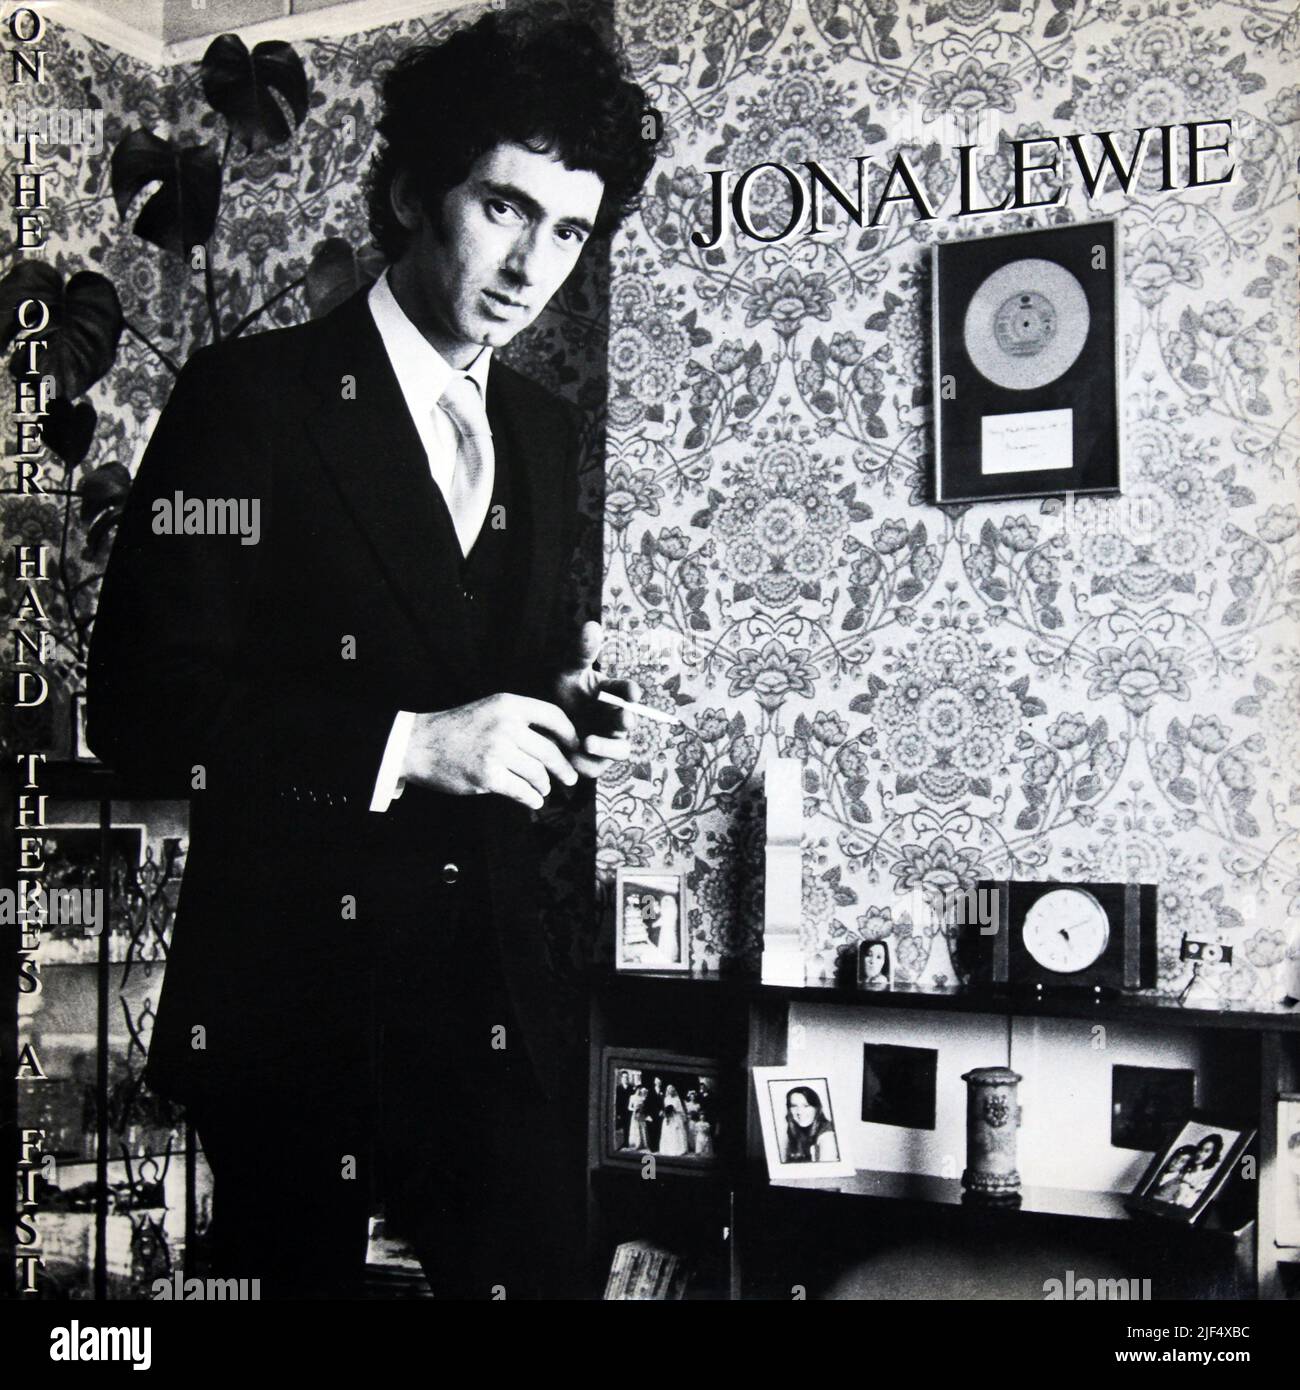 Jona Lewie: 1978. LP front cover: 'On the Other Hand There's A Fist'' Stock Photo